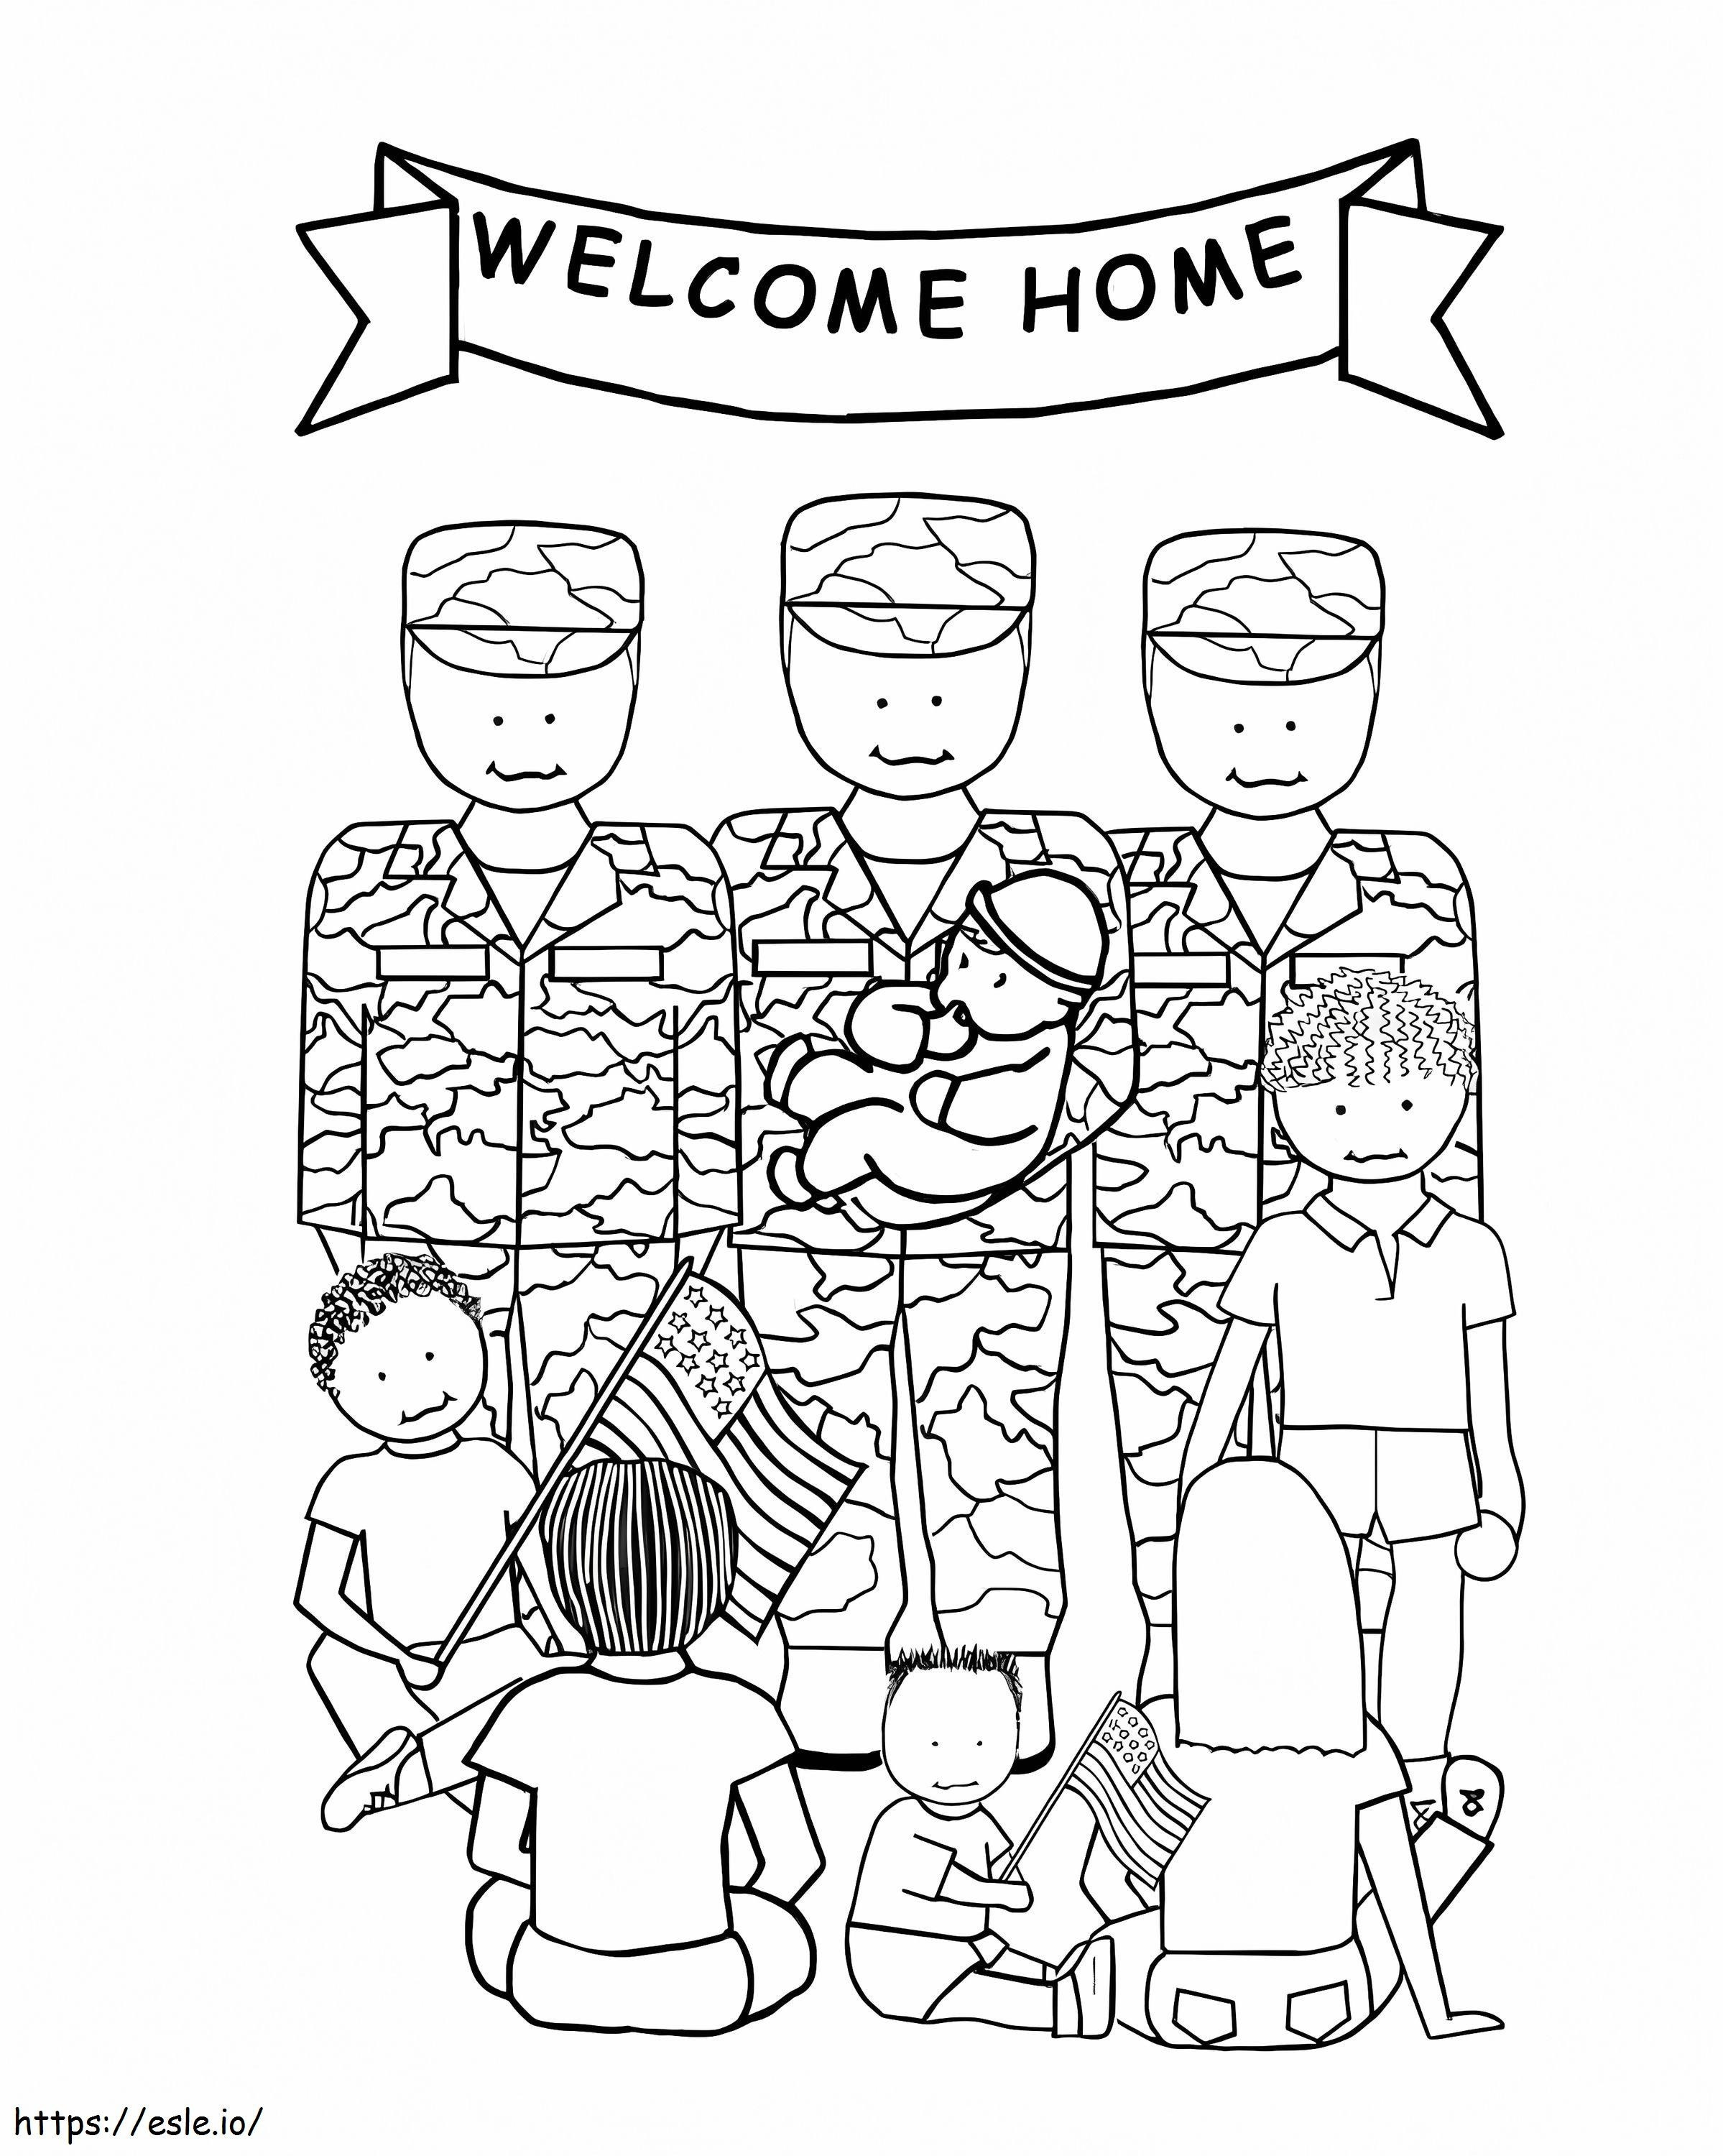 Welcome Home Veterans coloring page